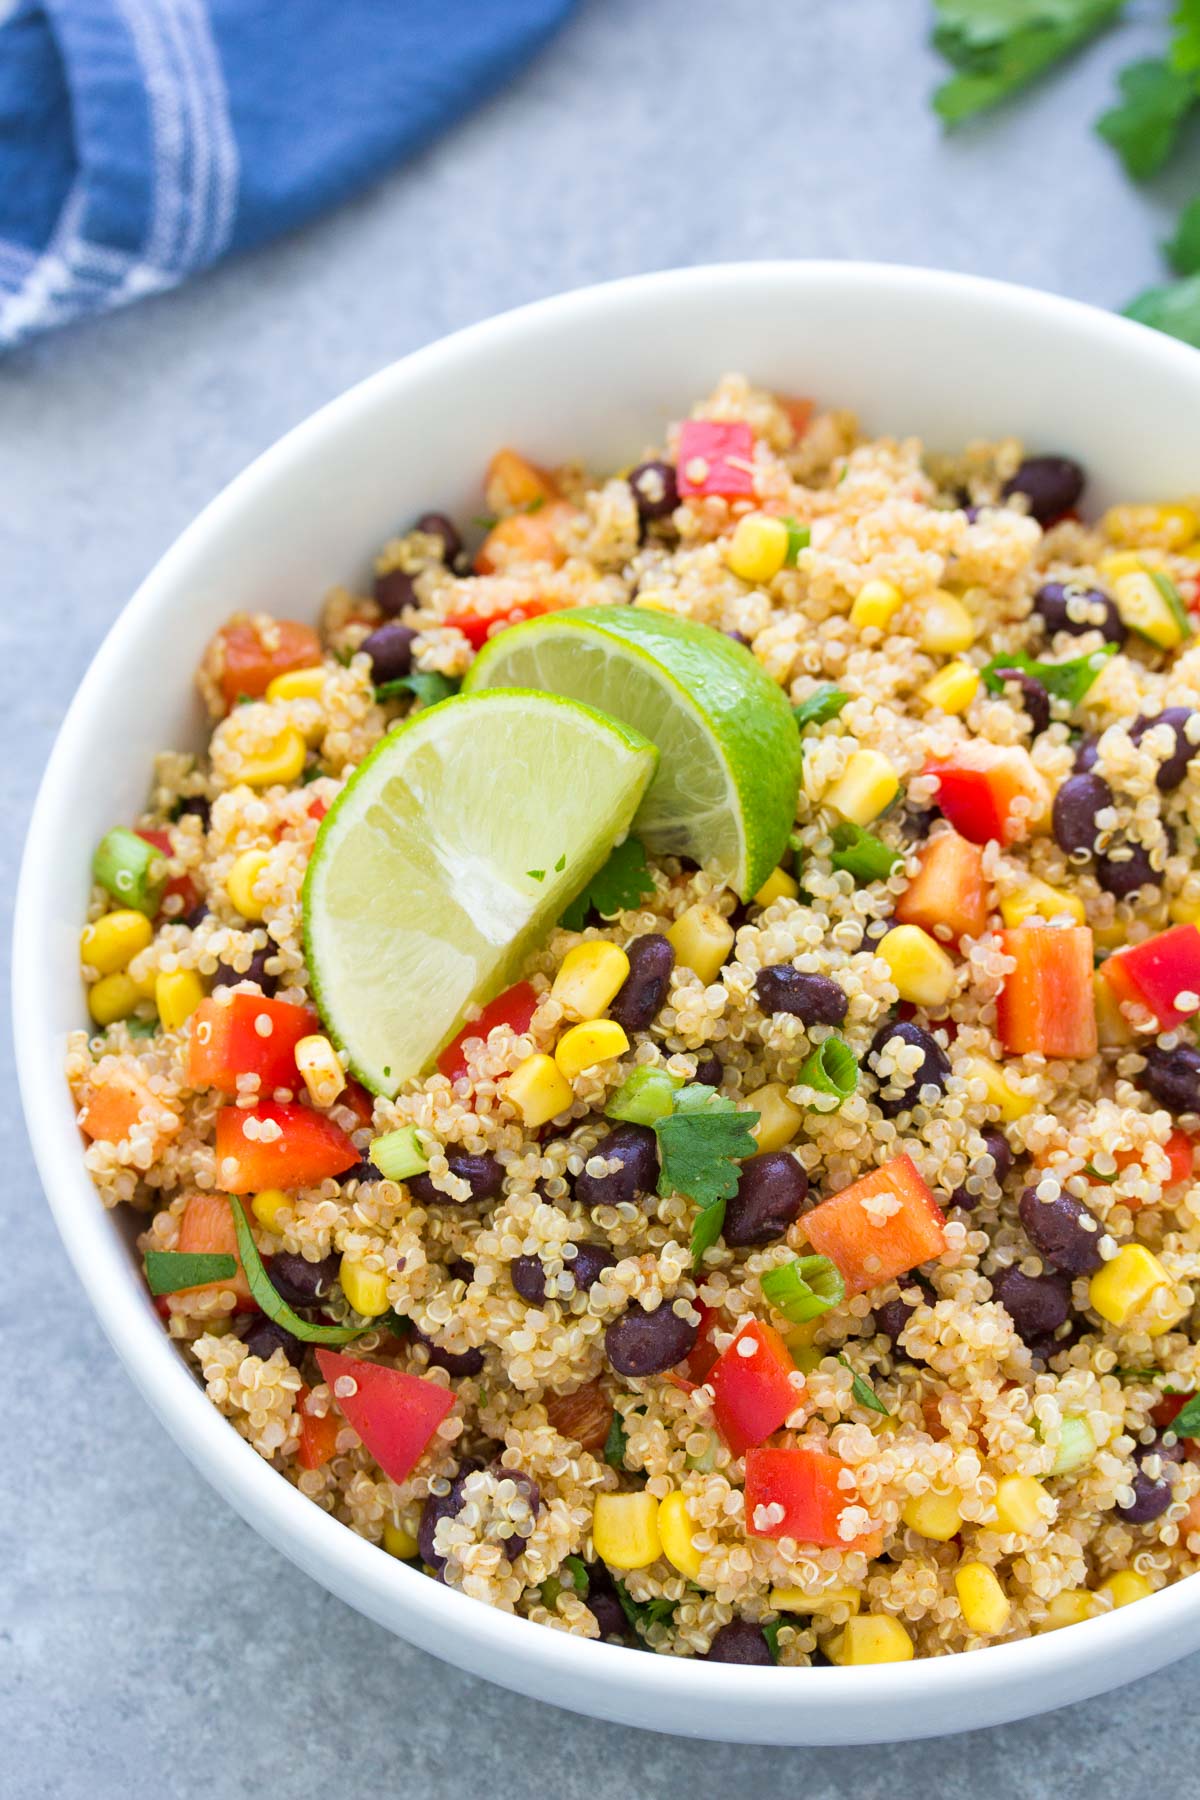 Southwest quinoa salad in a serving bowl with lime wedges.